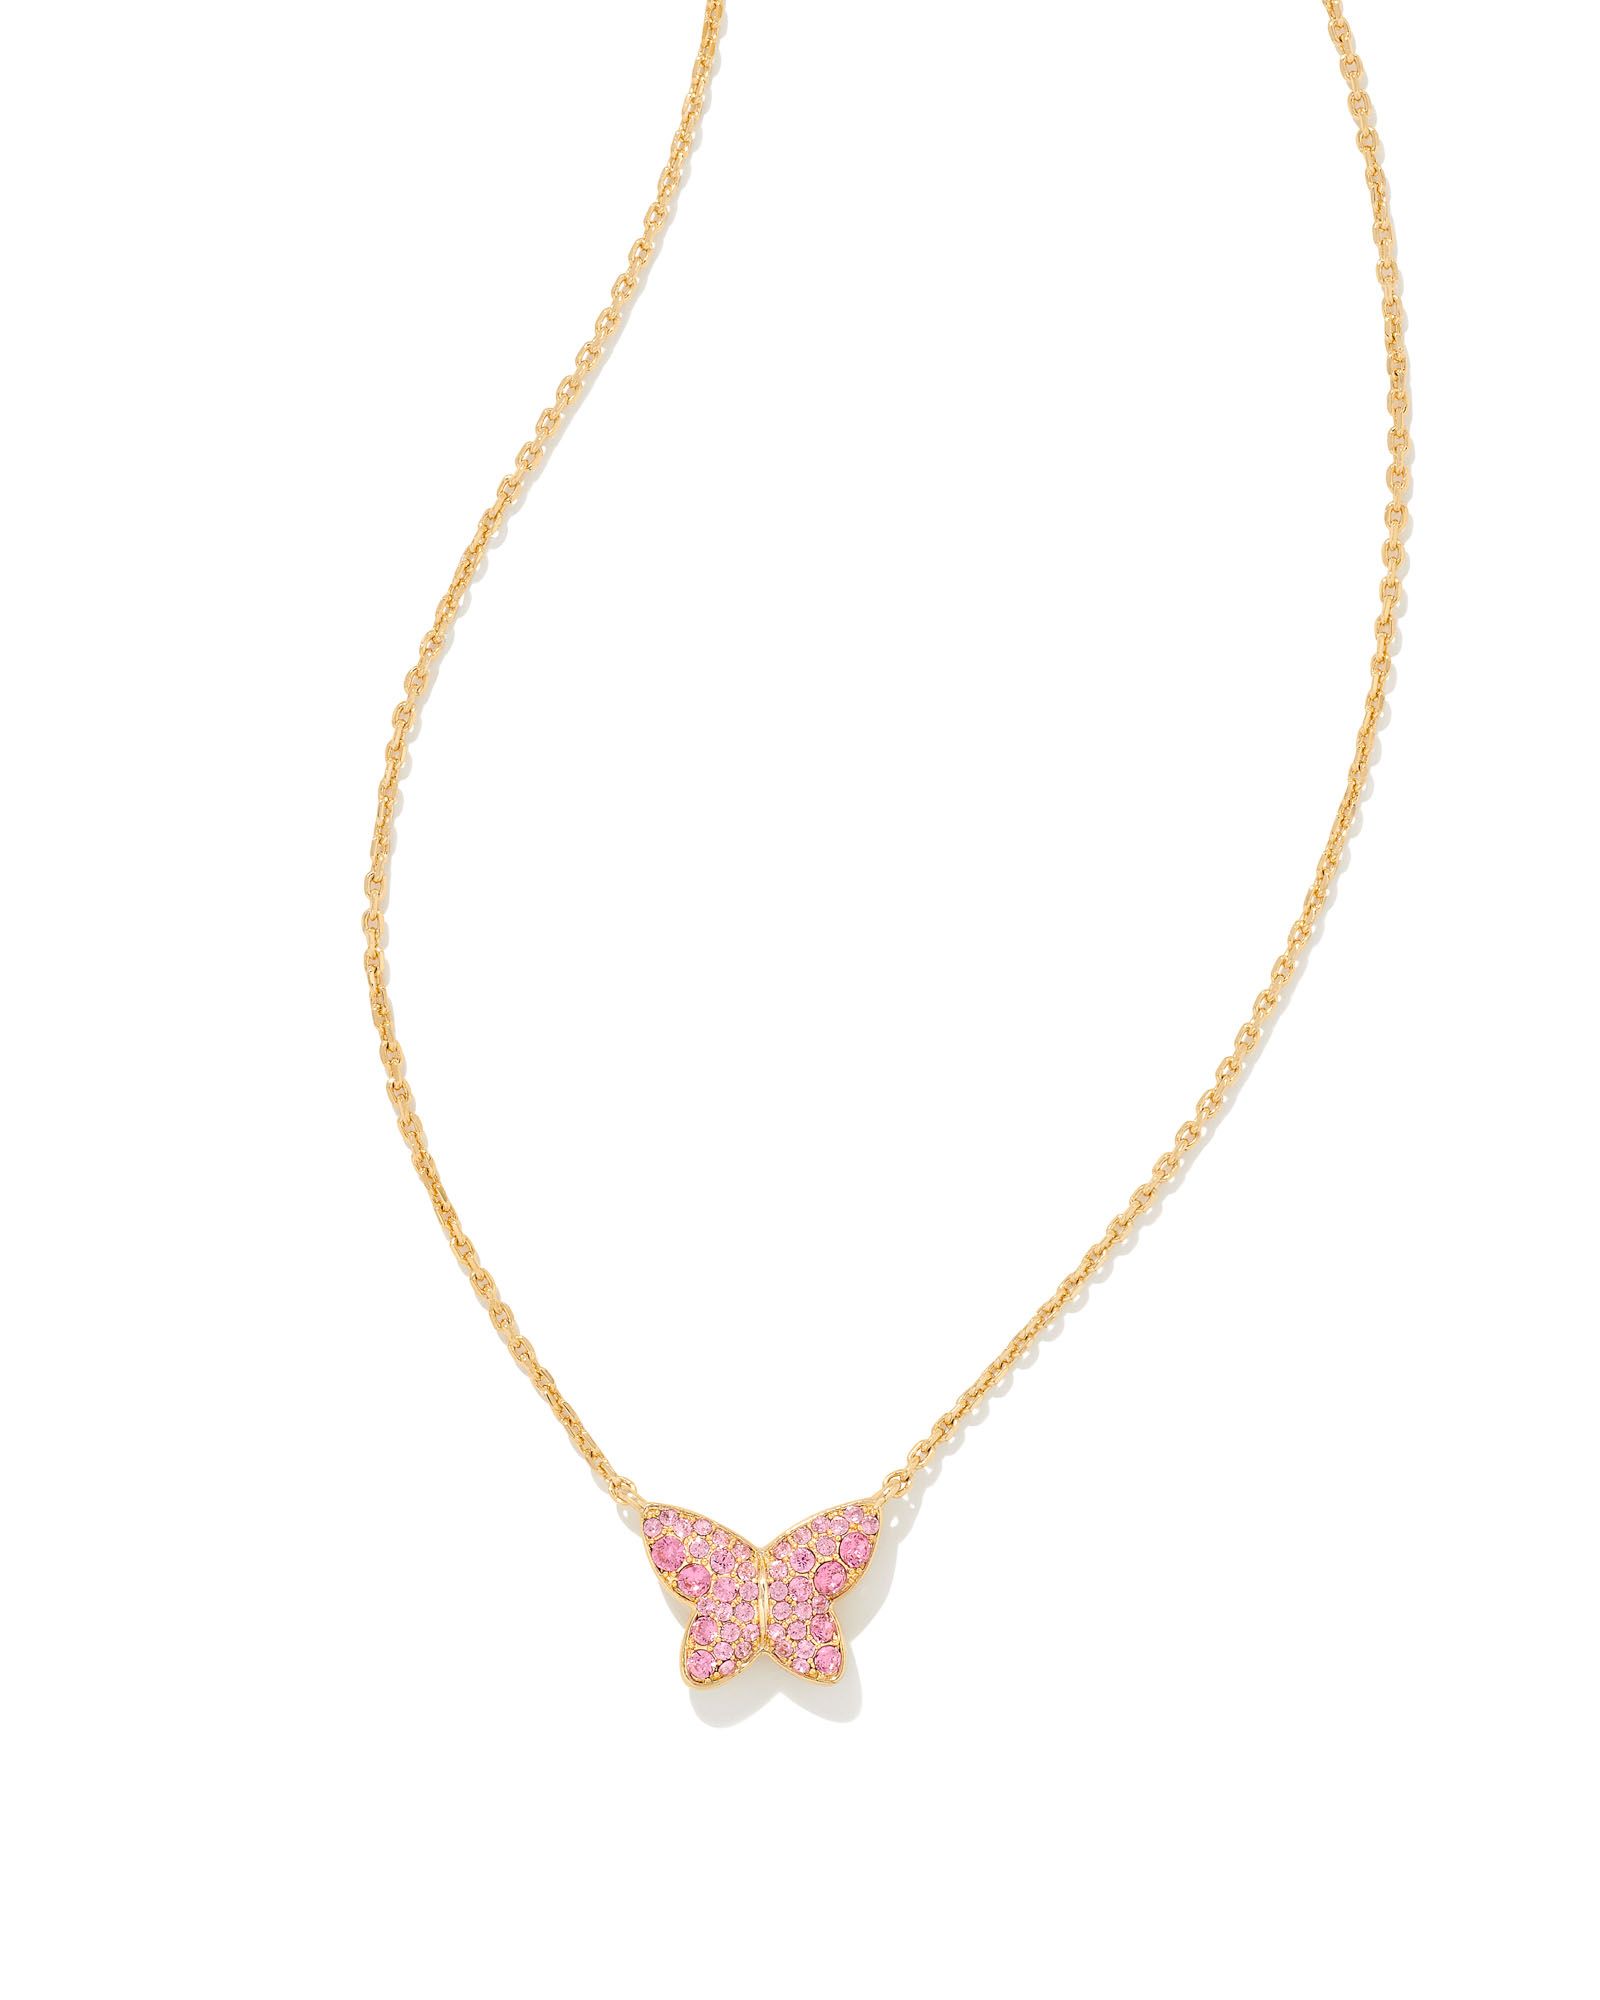 Lillia Butterfly Gold Pendant Necklace in Pink Crystal | Kendra Scott